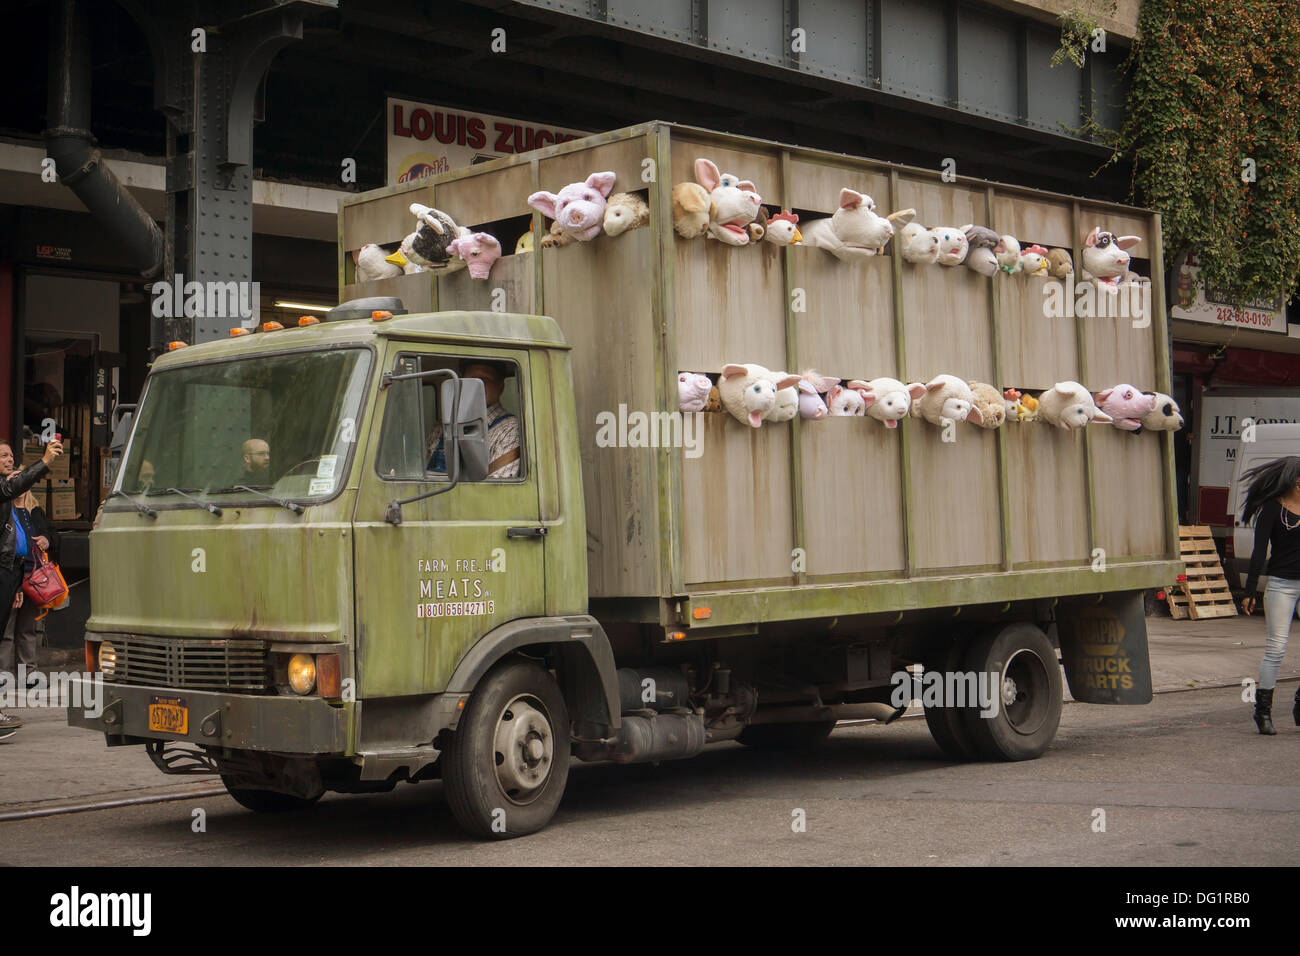 New York City, NY, USA. 11th Oct, 2013. Banksy enthusiasts flock to the trendy Meatpacking District in New York on Friday, October 11, 2013 to see the eleventh installment of Banksy's art, 'The Sirens of the Lambs'. This particular sculptural piece consists of a slaughterhouse truck filled with bleating plush animals, controlled by puppeteers, which were driven around by a driver, who remained in character. Credit:  Frances Roberts/Alamy Live News Stock Photo